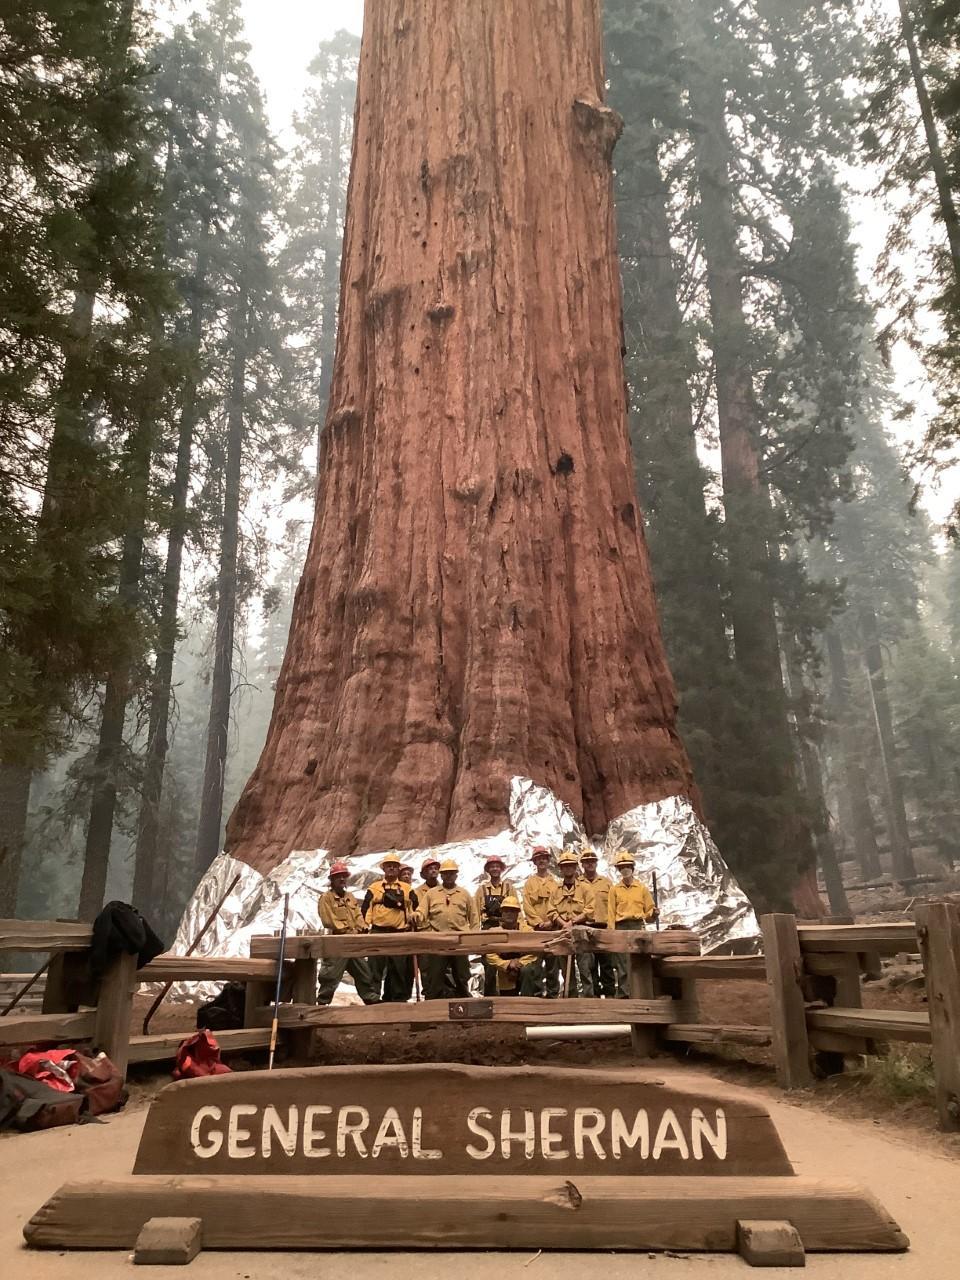 A group of wildland firefighters poses with a huge red tree wrapped in what looks like aluminum foil.